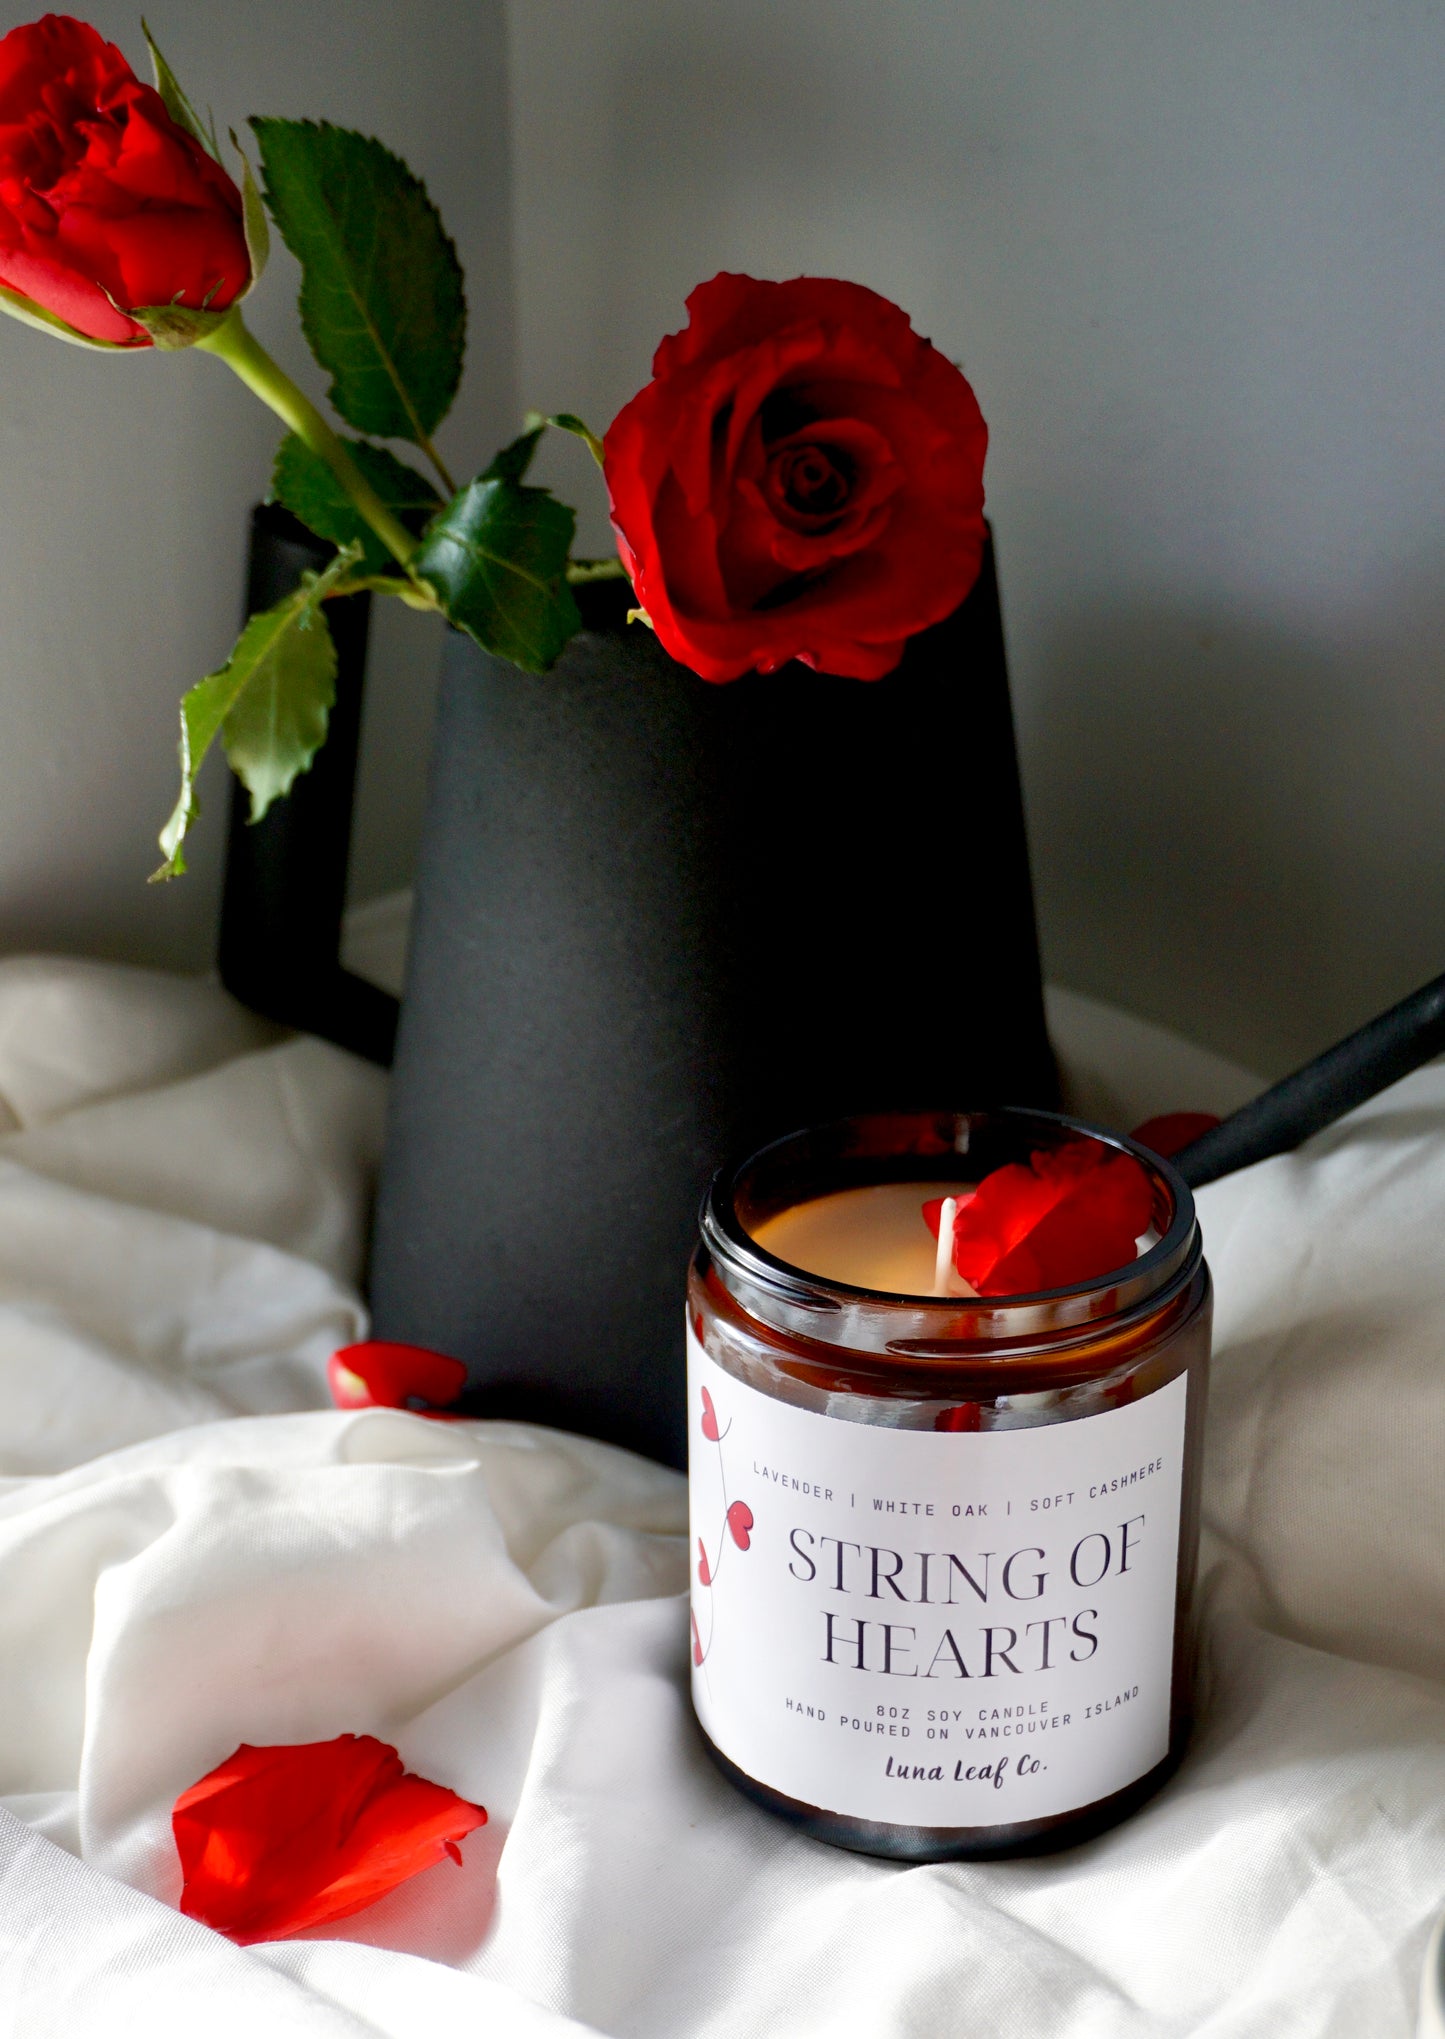 String of Hearts Soy Candle